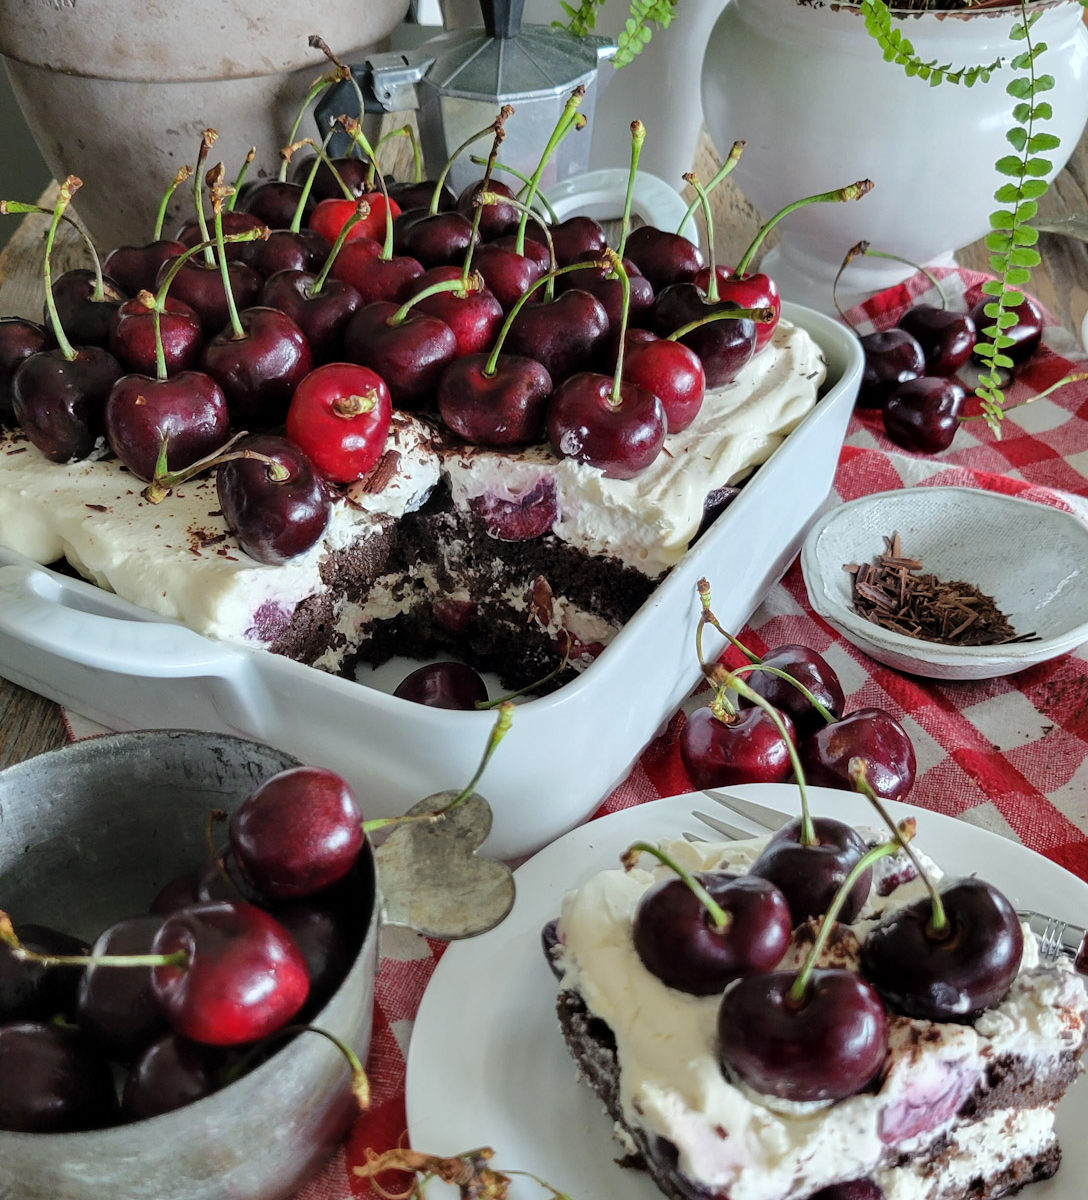 Side view into a pan of Black Forest Tiramisu showing the chocolate and cherry layers, with a slice on a small plate in the foreground. Fresh sherries and green plants as well as a small espresso maker are in the background.